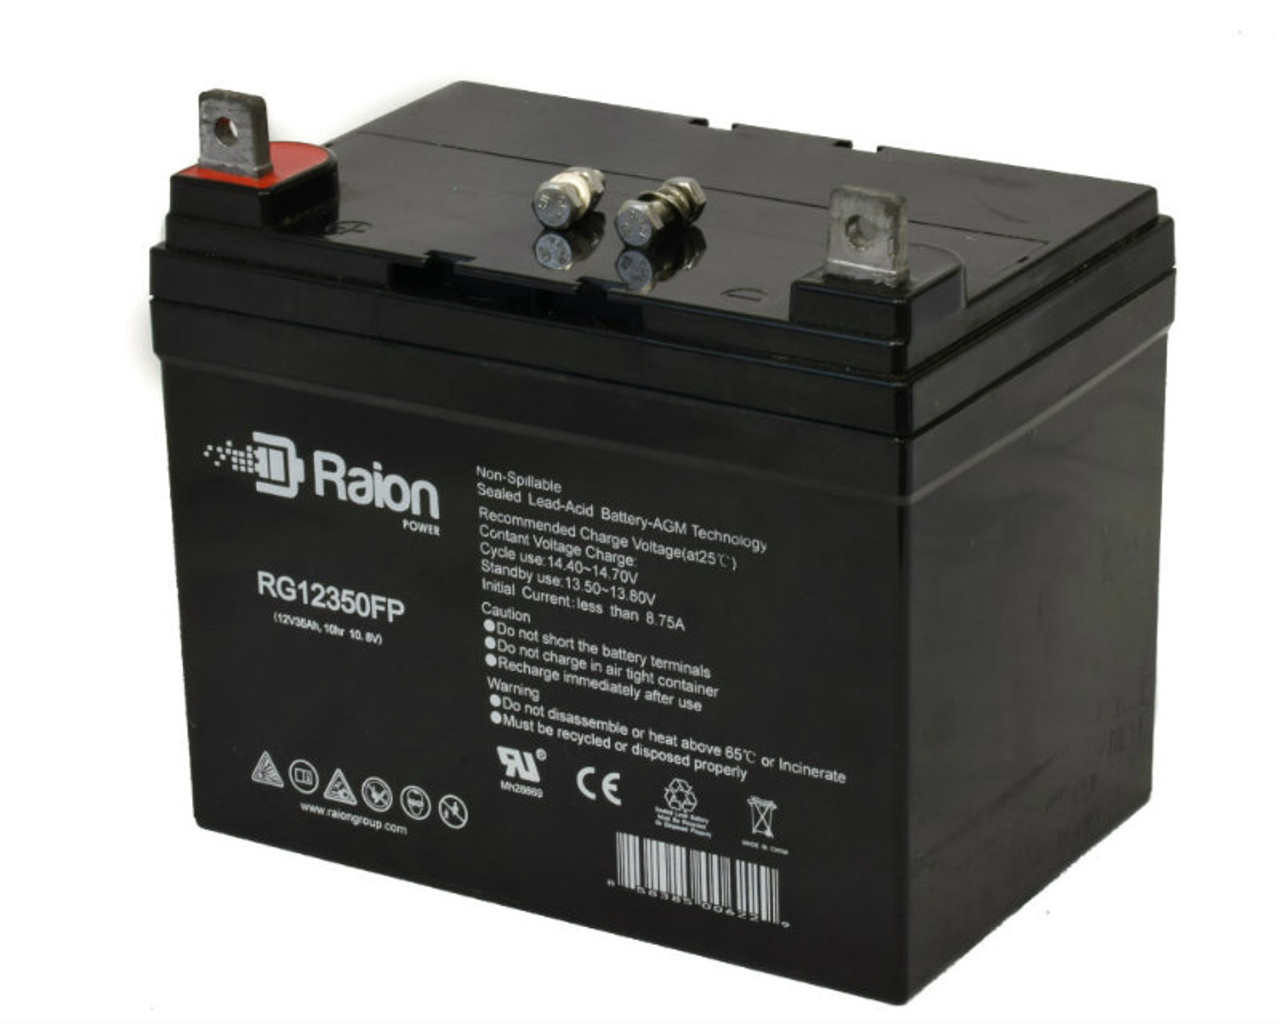 Raion Power Replacement 12V 35Ah Battery for Toro Z17-44 - 1 Pack